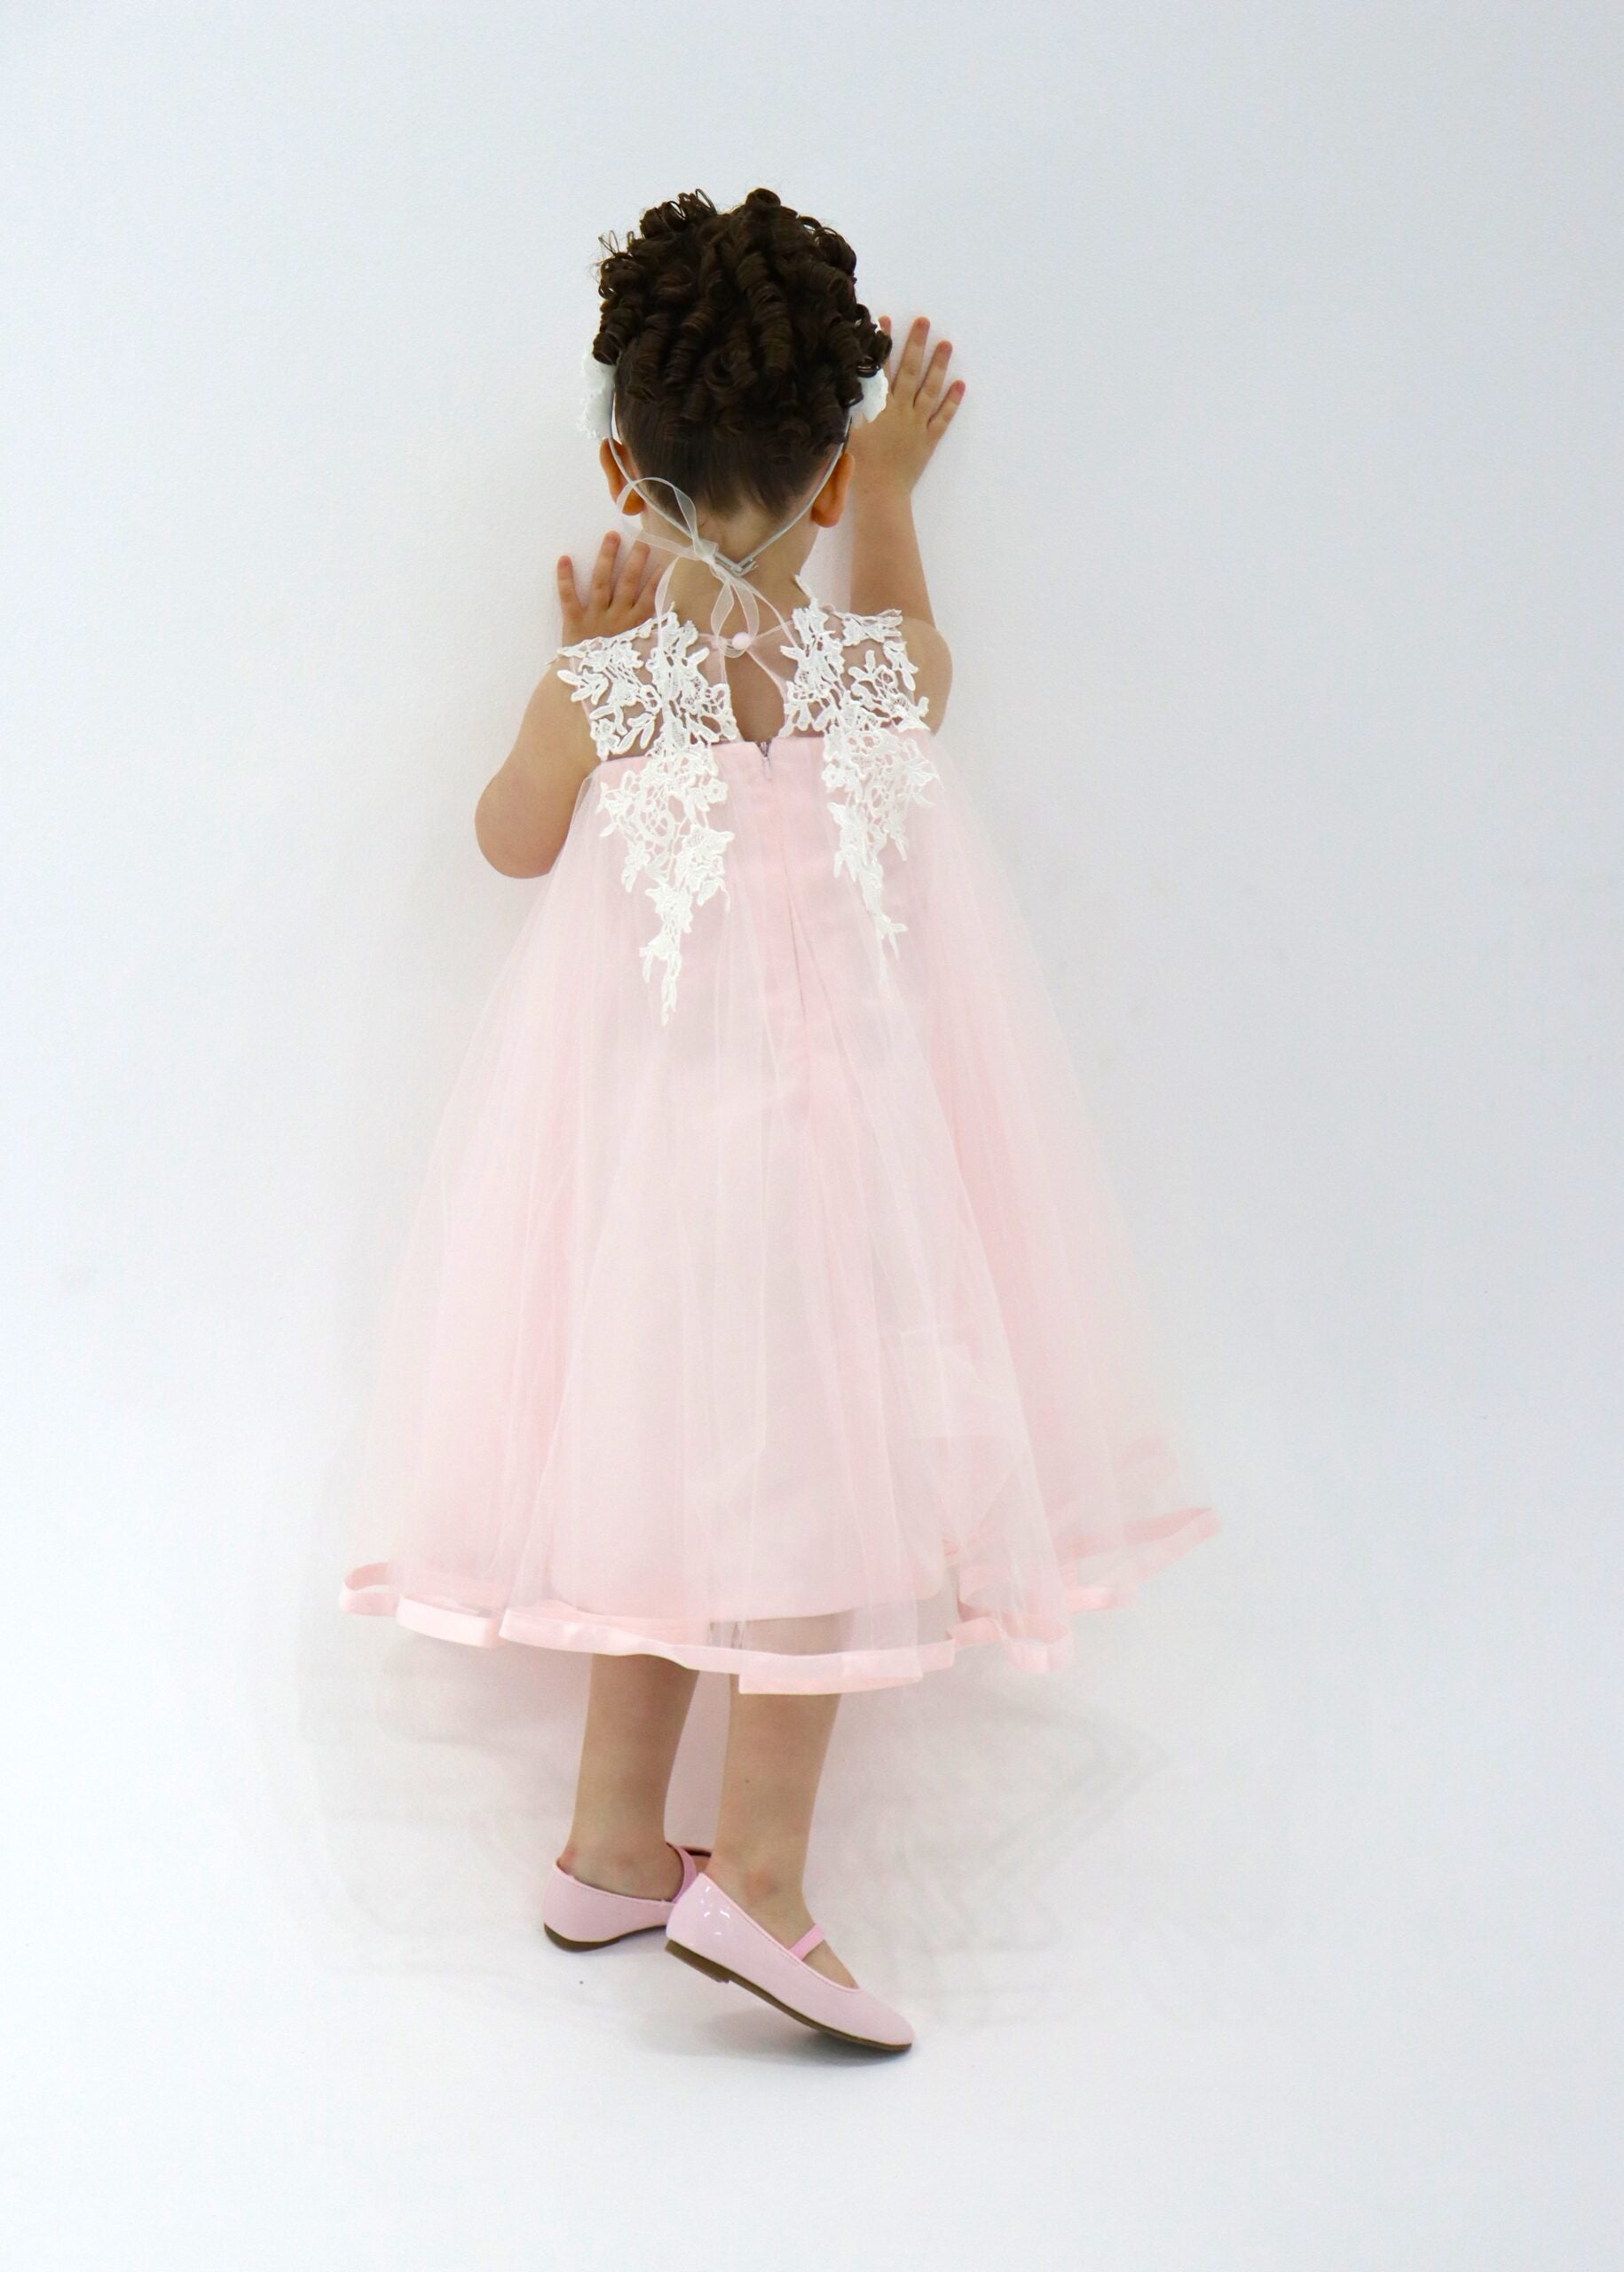 Flower Girl Pink With White Lace Dress